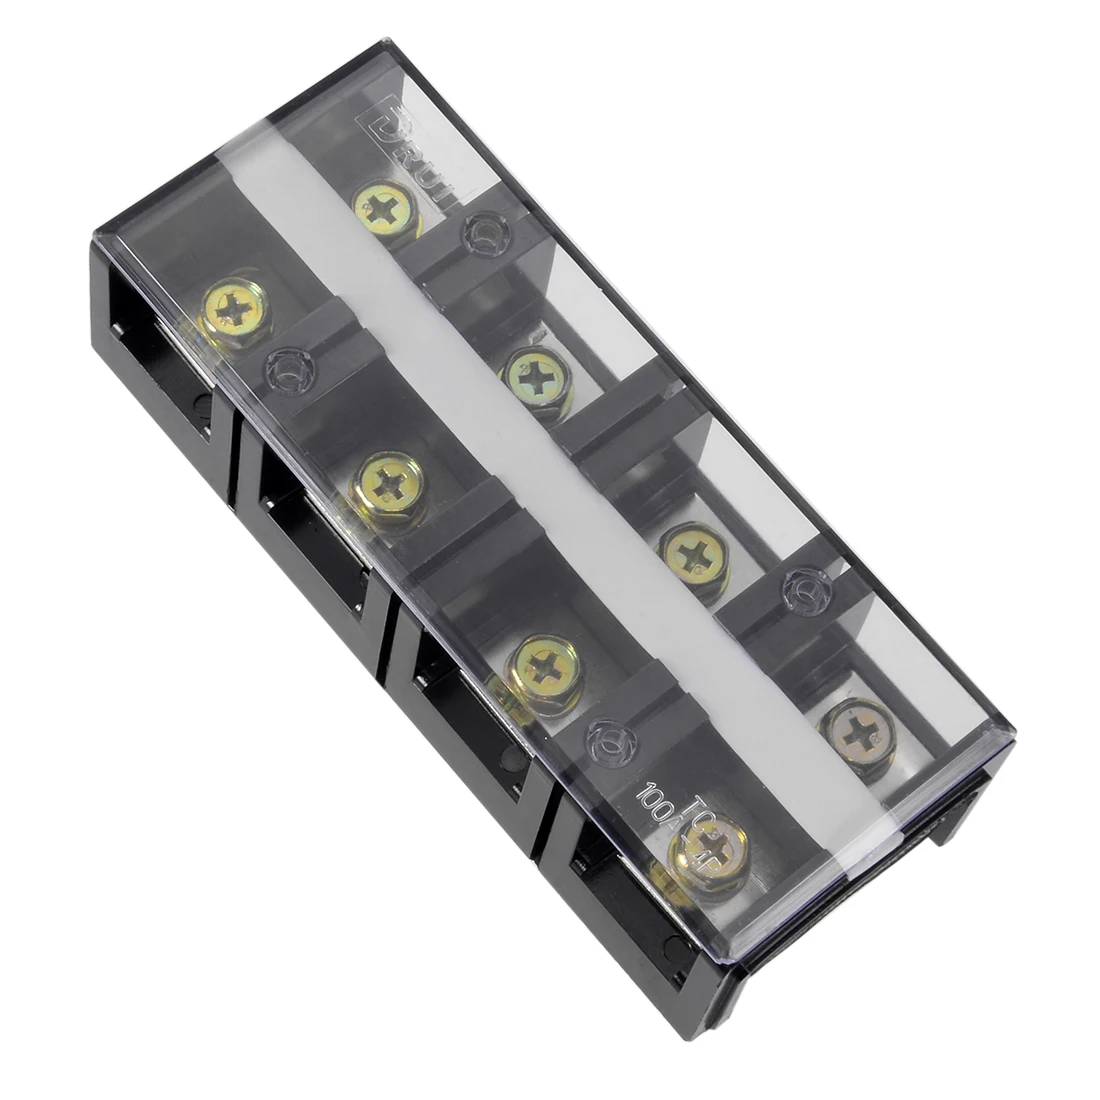 1pcs Terminal 600V 100A Dual Rows 4 Positions Wire Barrier Block Terminal Strip for Wires Connecting of Home Appliances